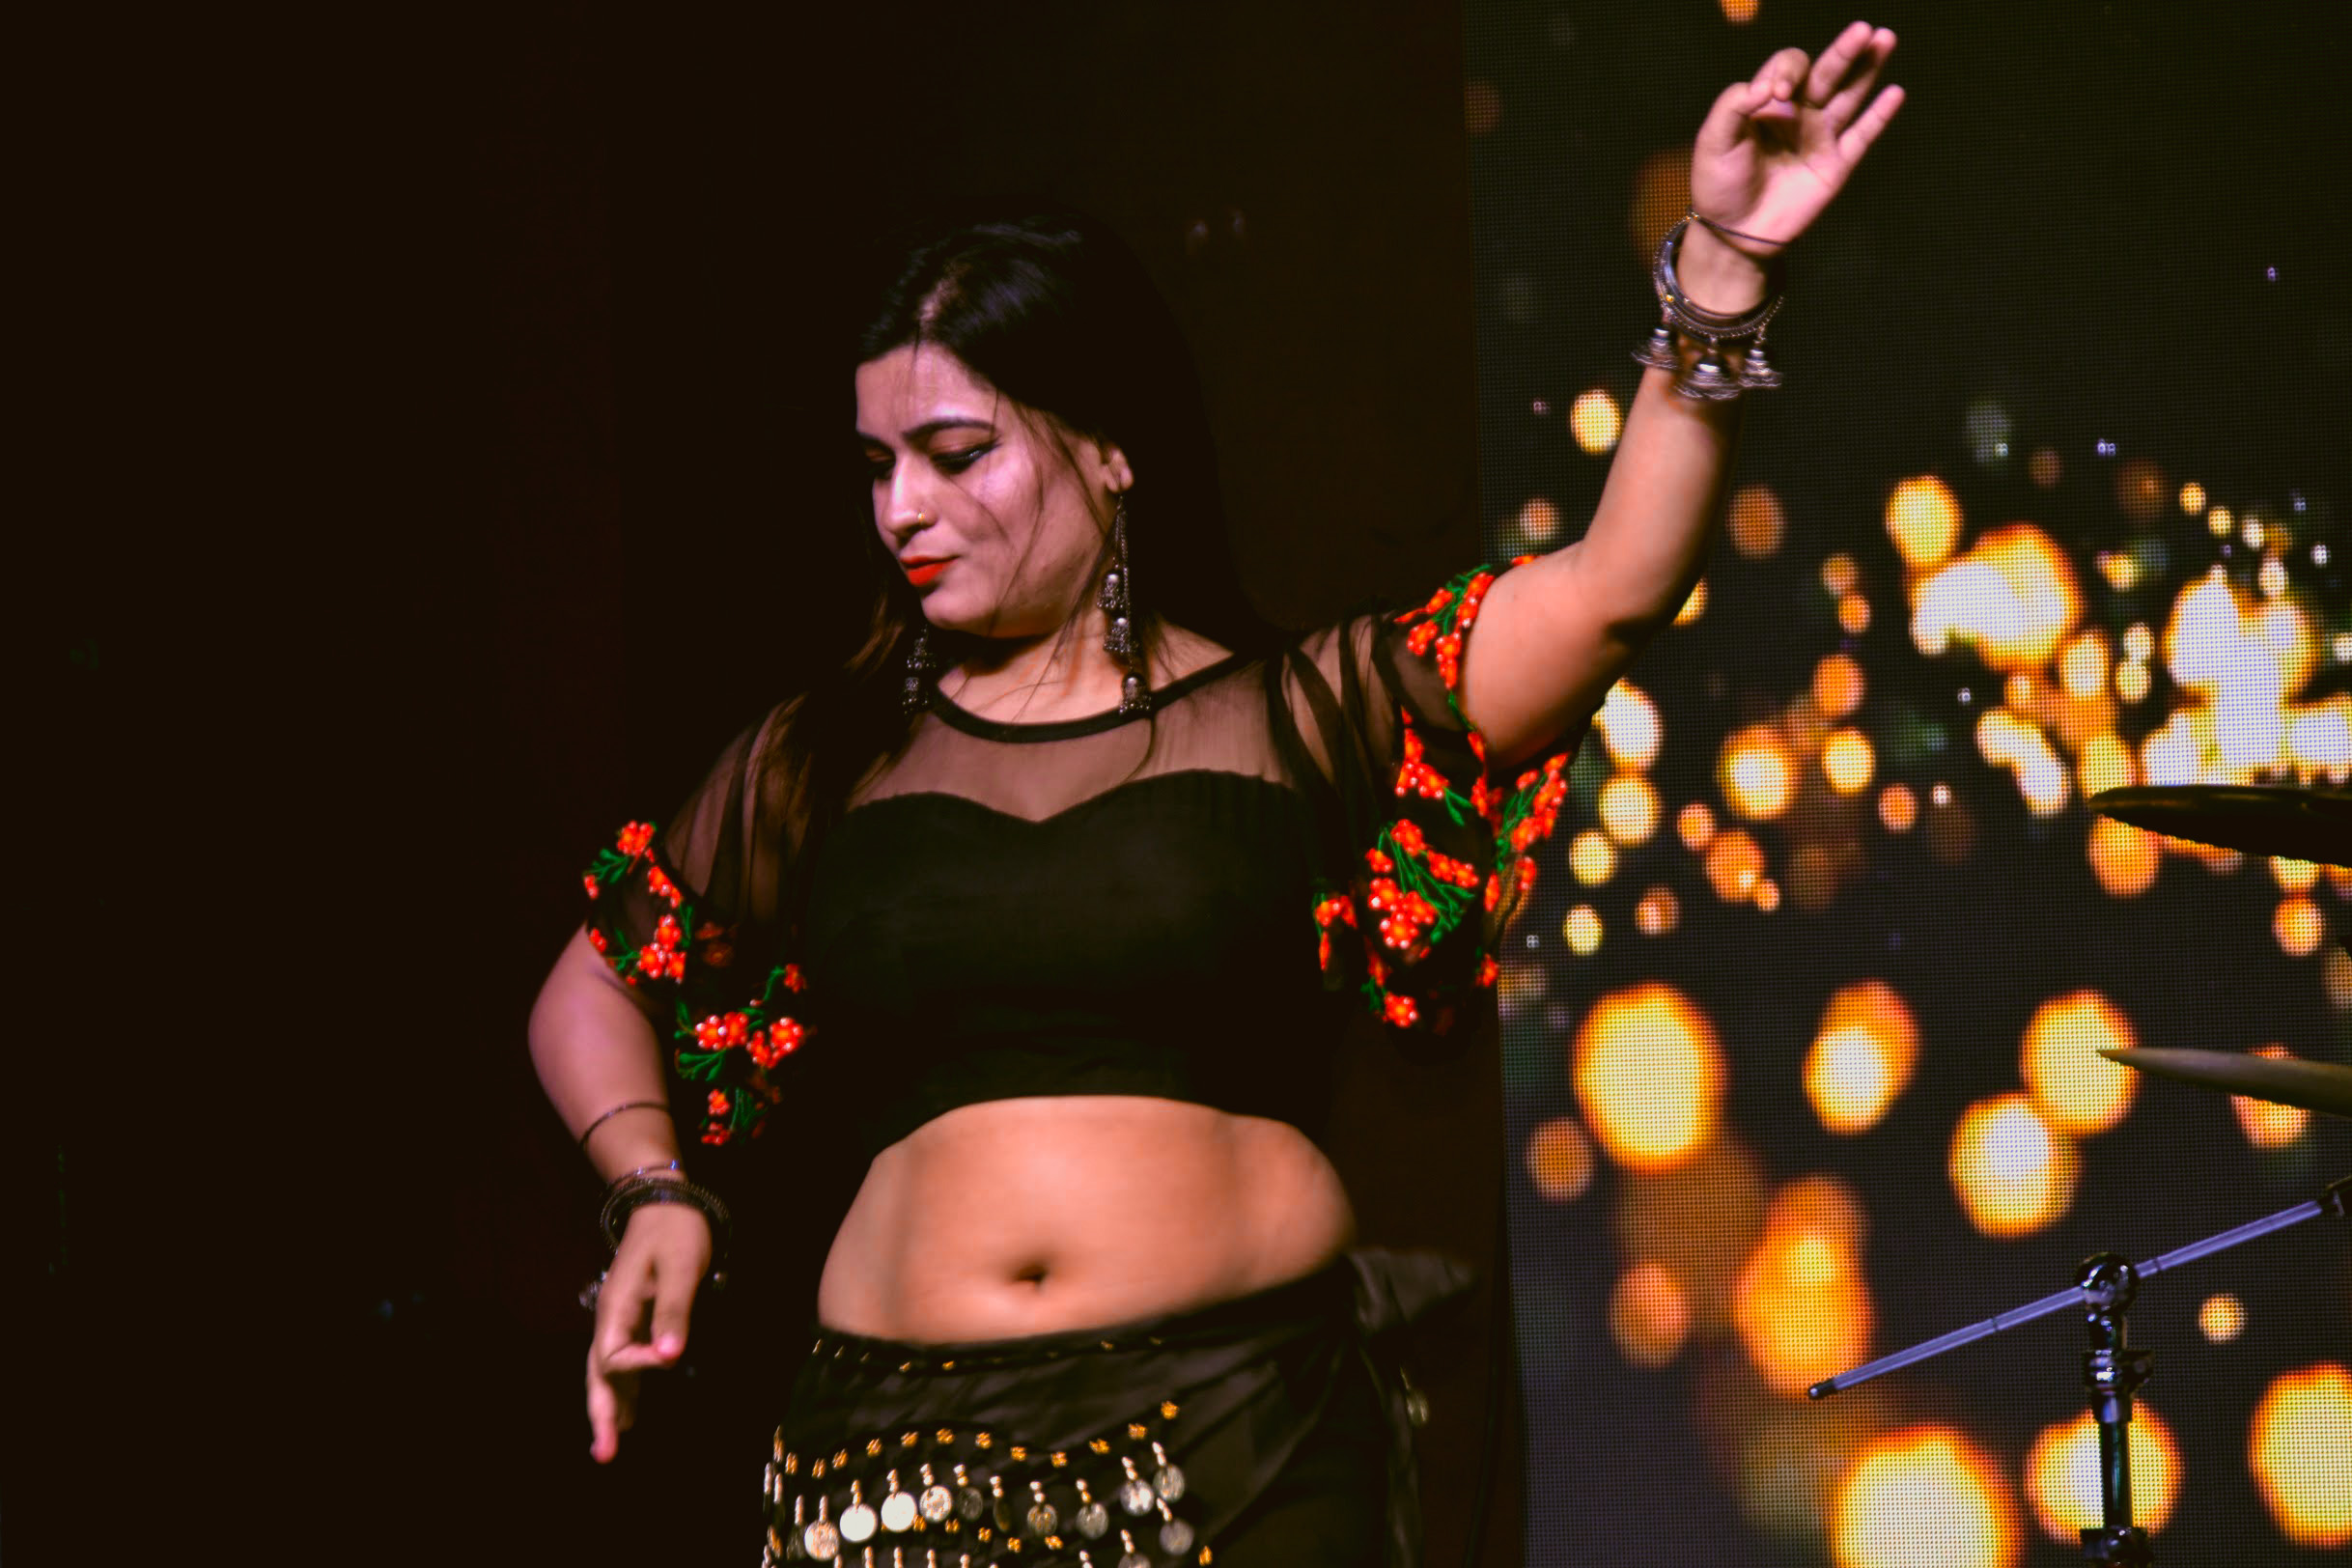 A belly dance performer